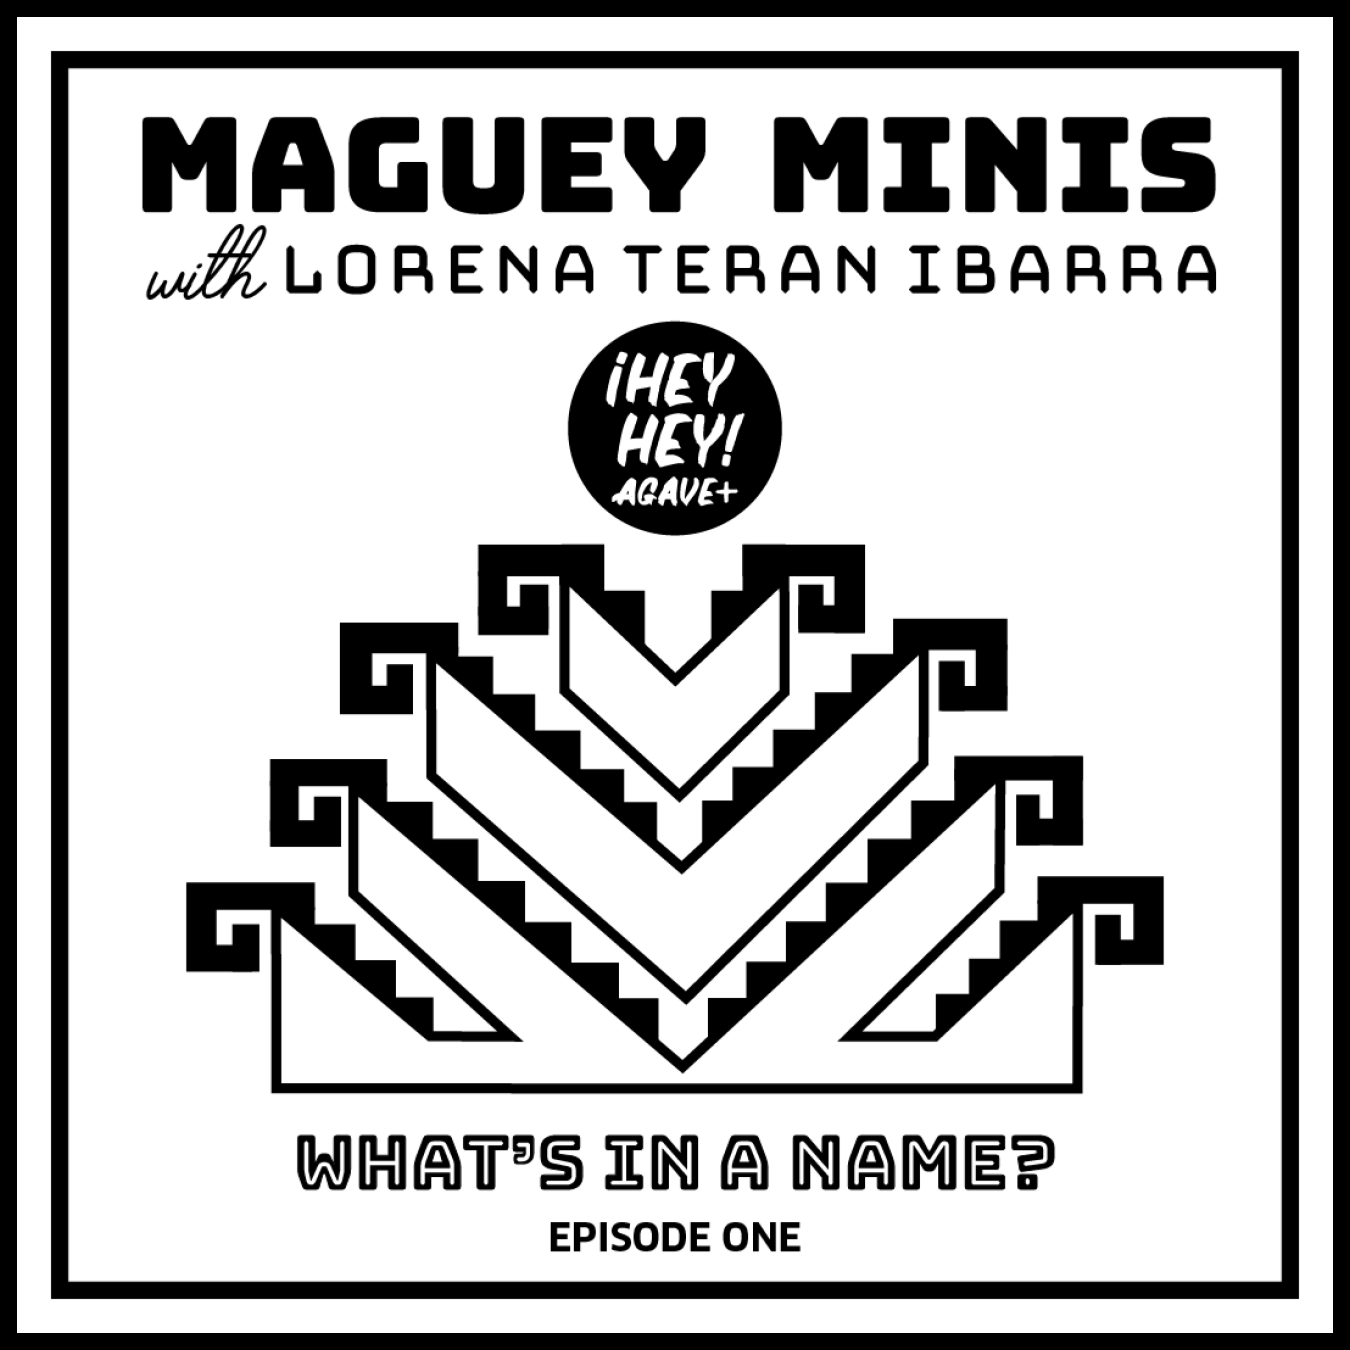 Maguey Minis + Episode One